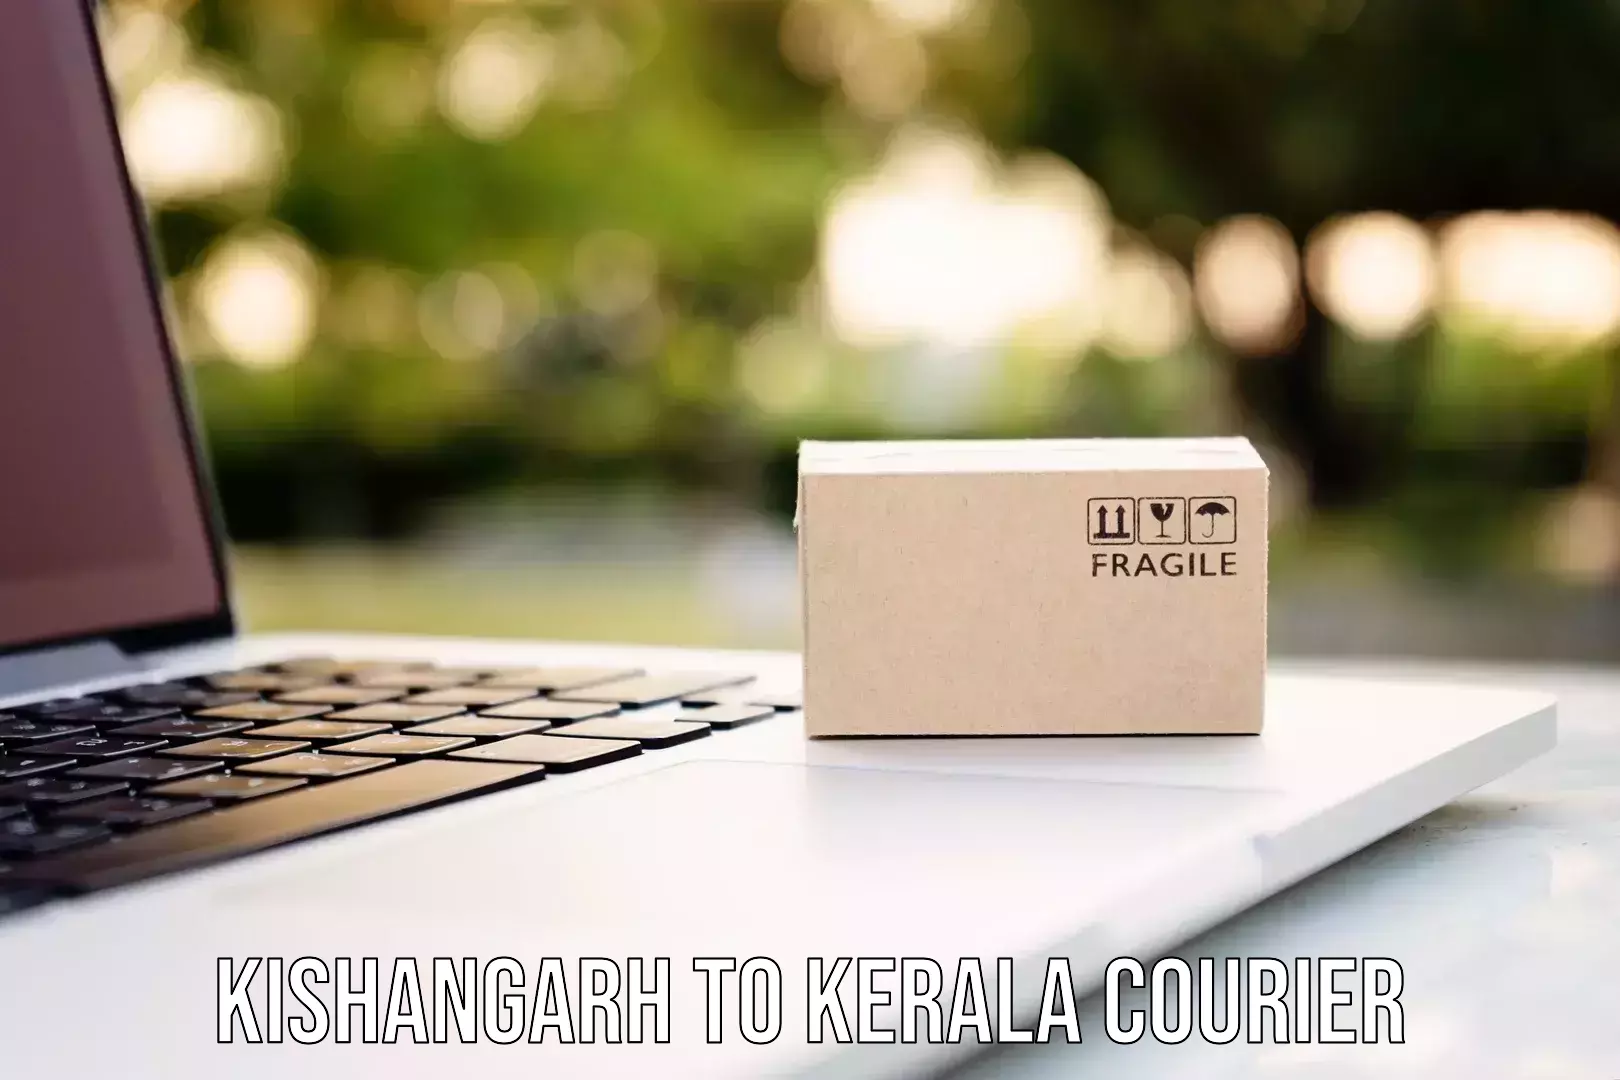 Customer-focused courier Kishangarh to Cochin University of Science and Technology